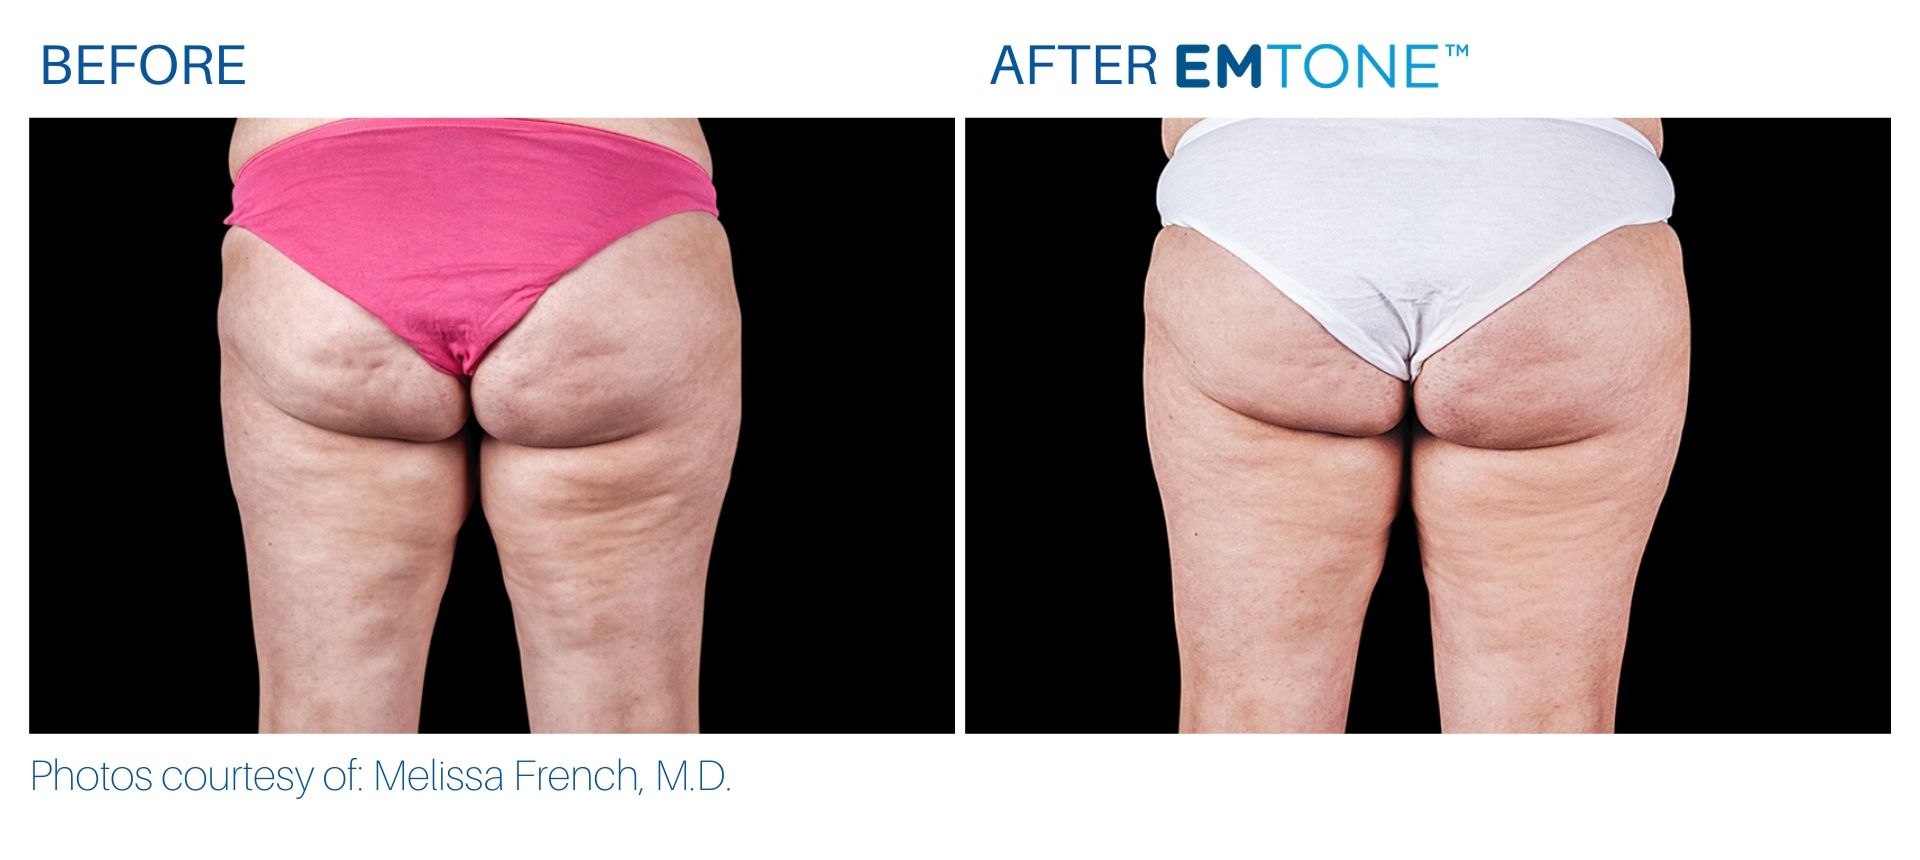 emtone_before_and_after_bodymorphmd_3